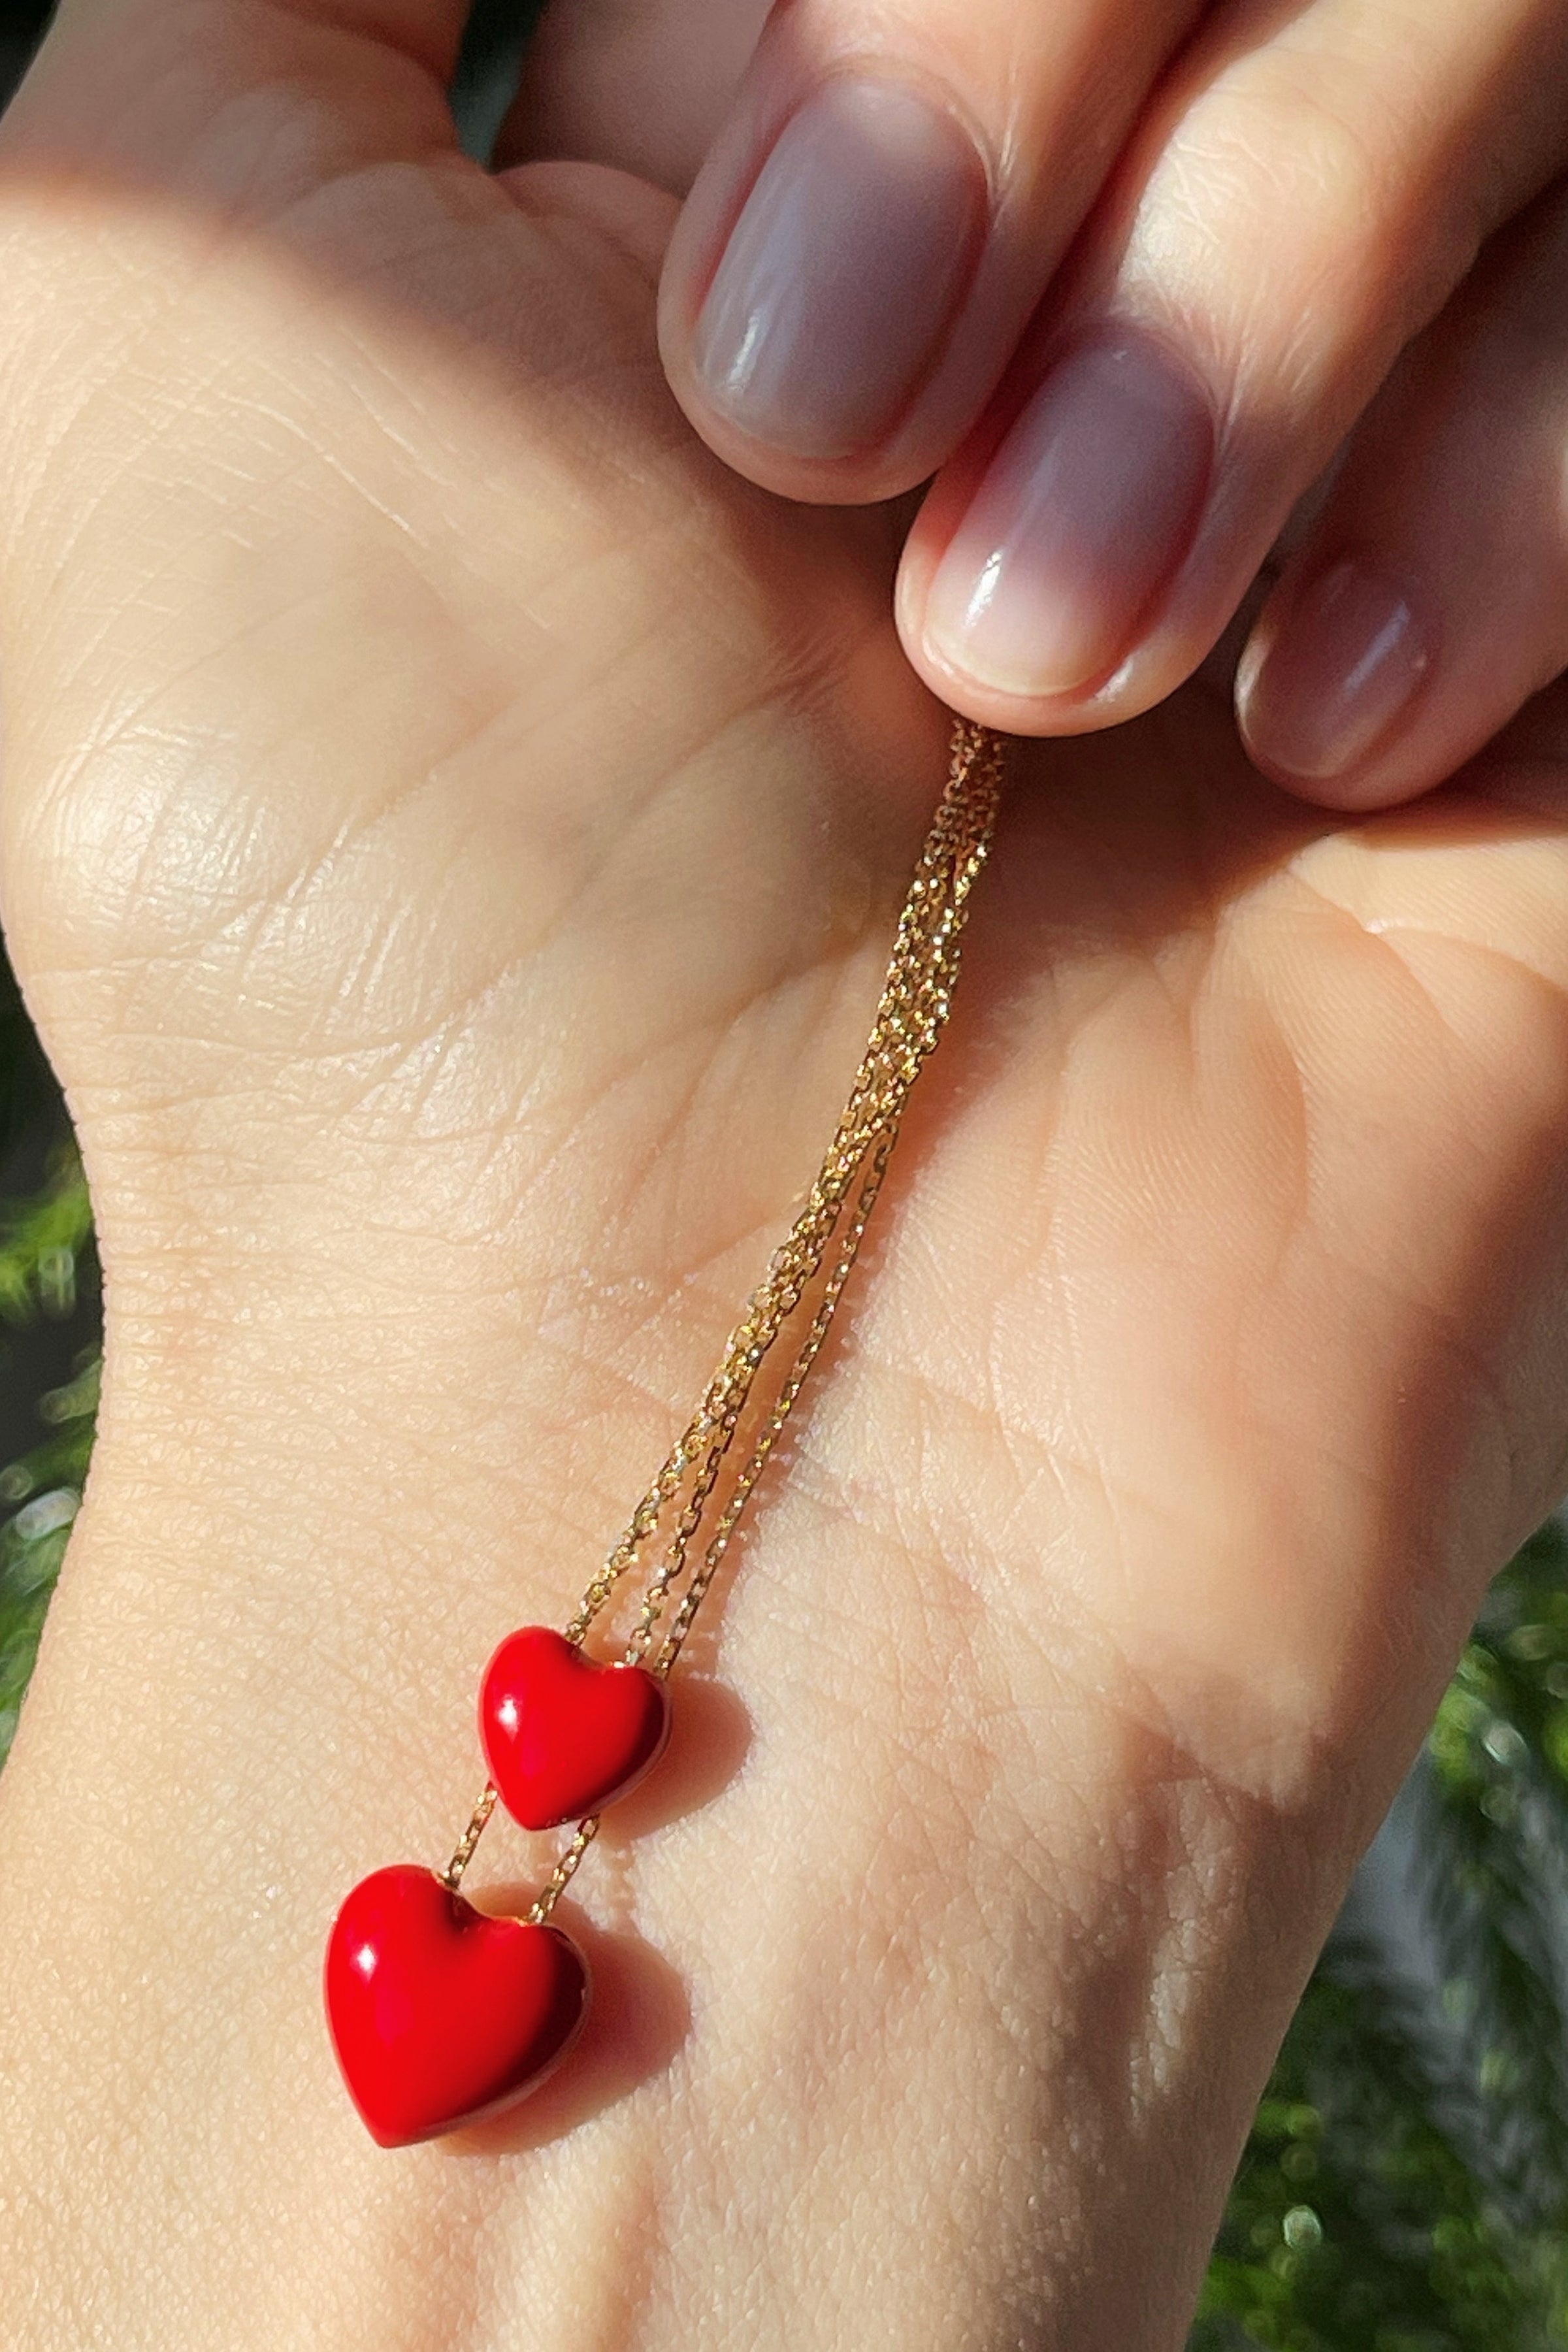 Big red heart necklace